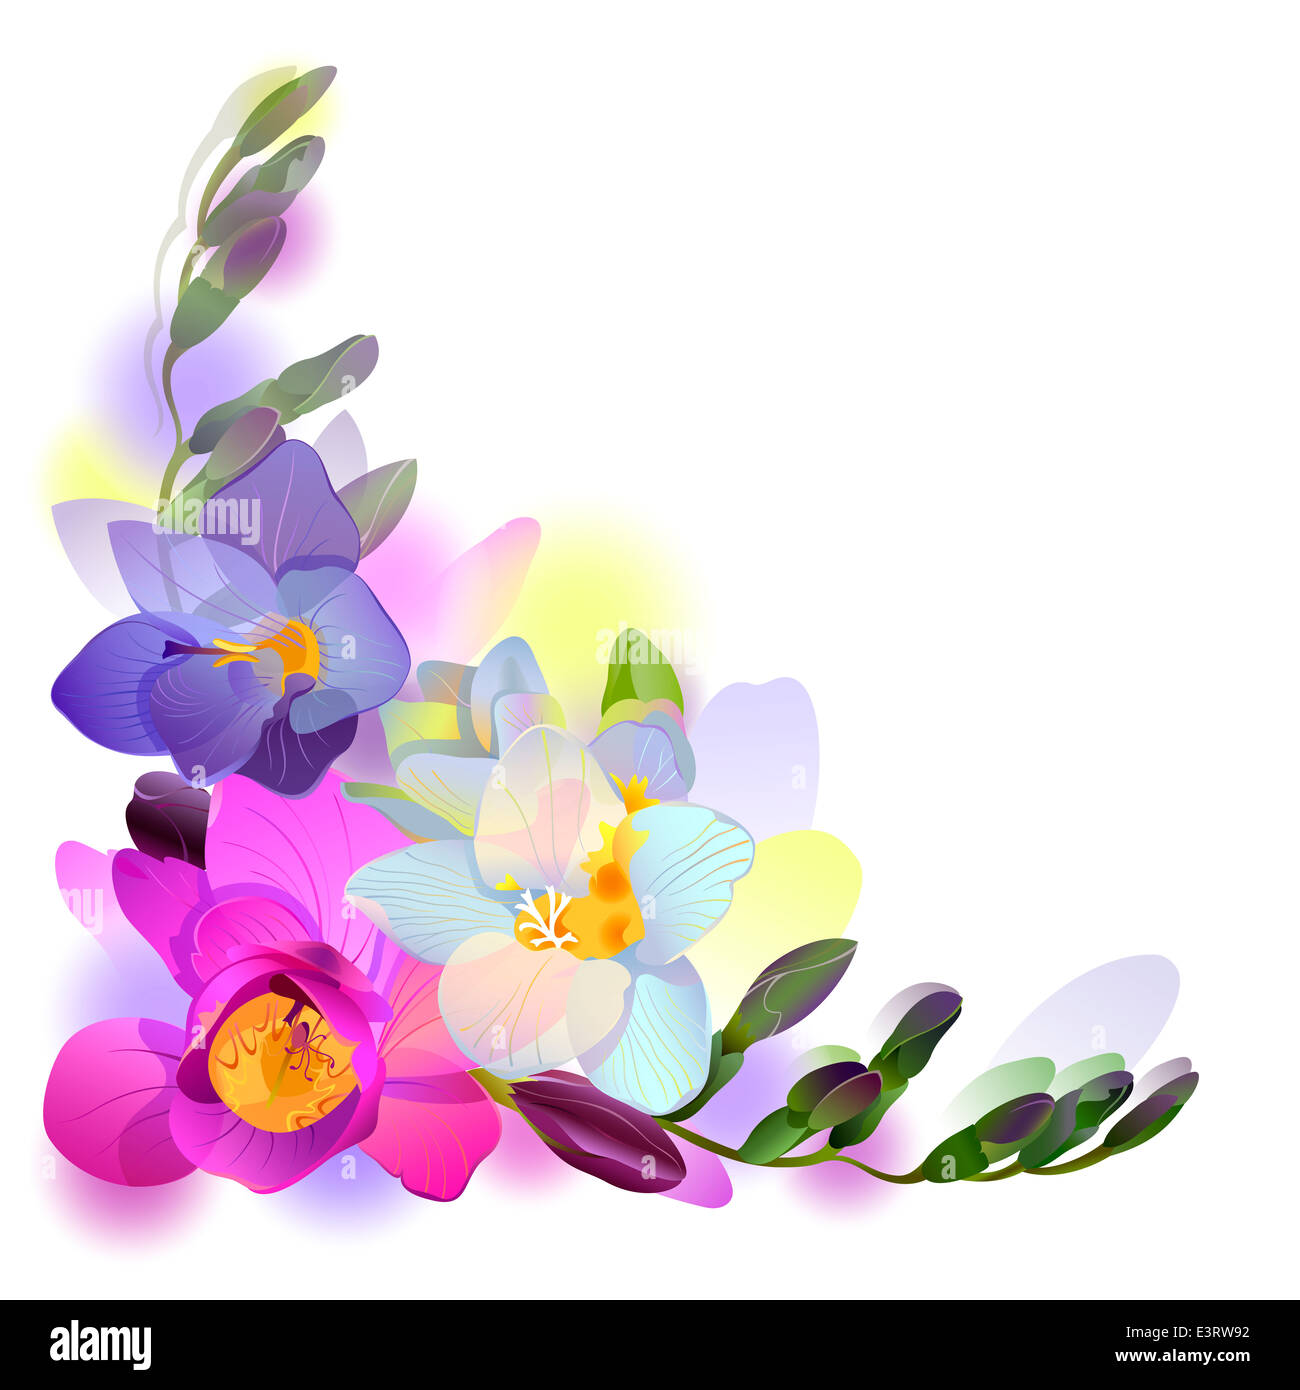 Greeting background with freesia flowers Stock Photo